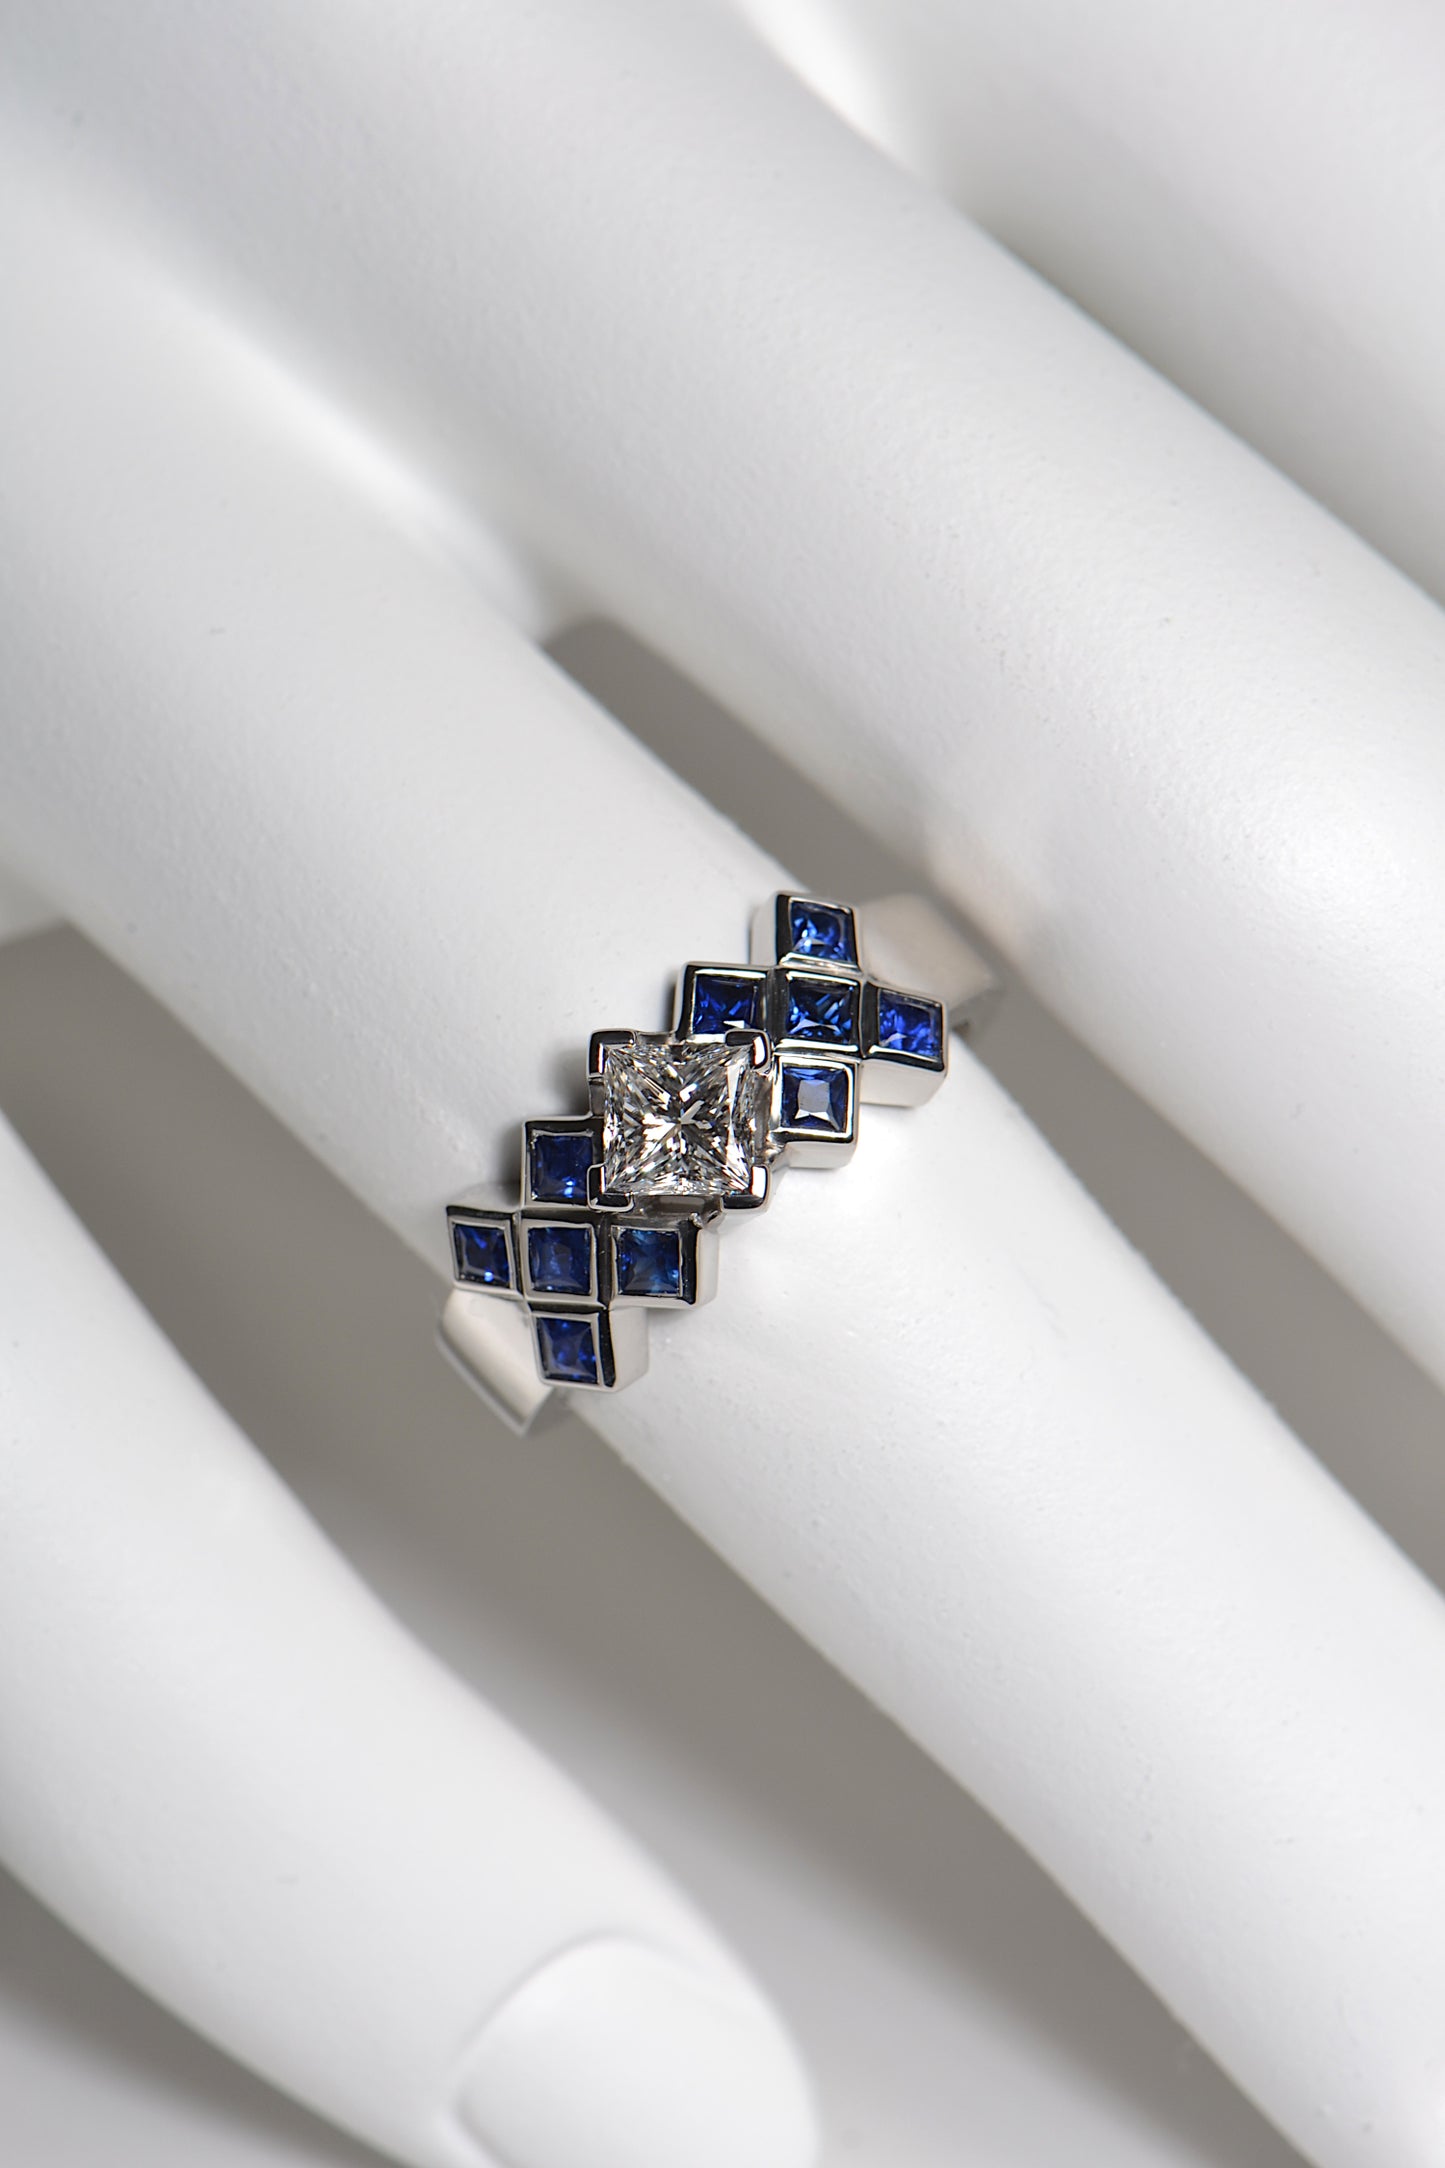 The tartan ring is set with a central 0.53ct princess cut diamond above a chequered pattern of 2mm blue sapphires . The platinum ring is 7.7mm wide at the front so it is a substantial statement engagement ring. Unmistakably scottish. 